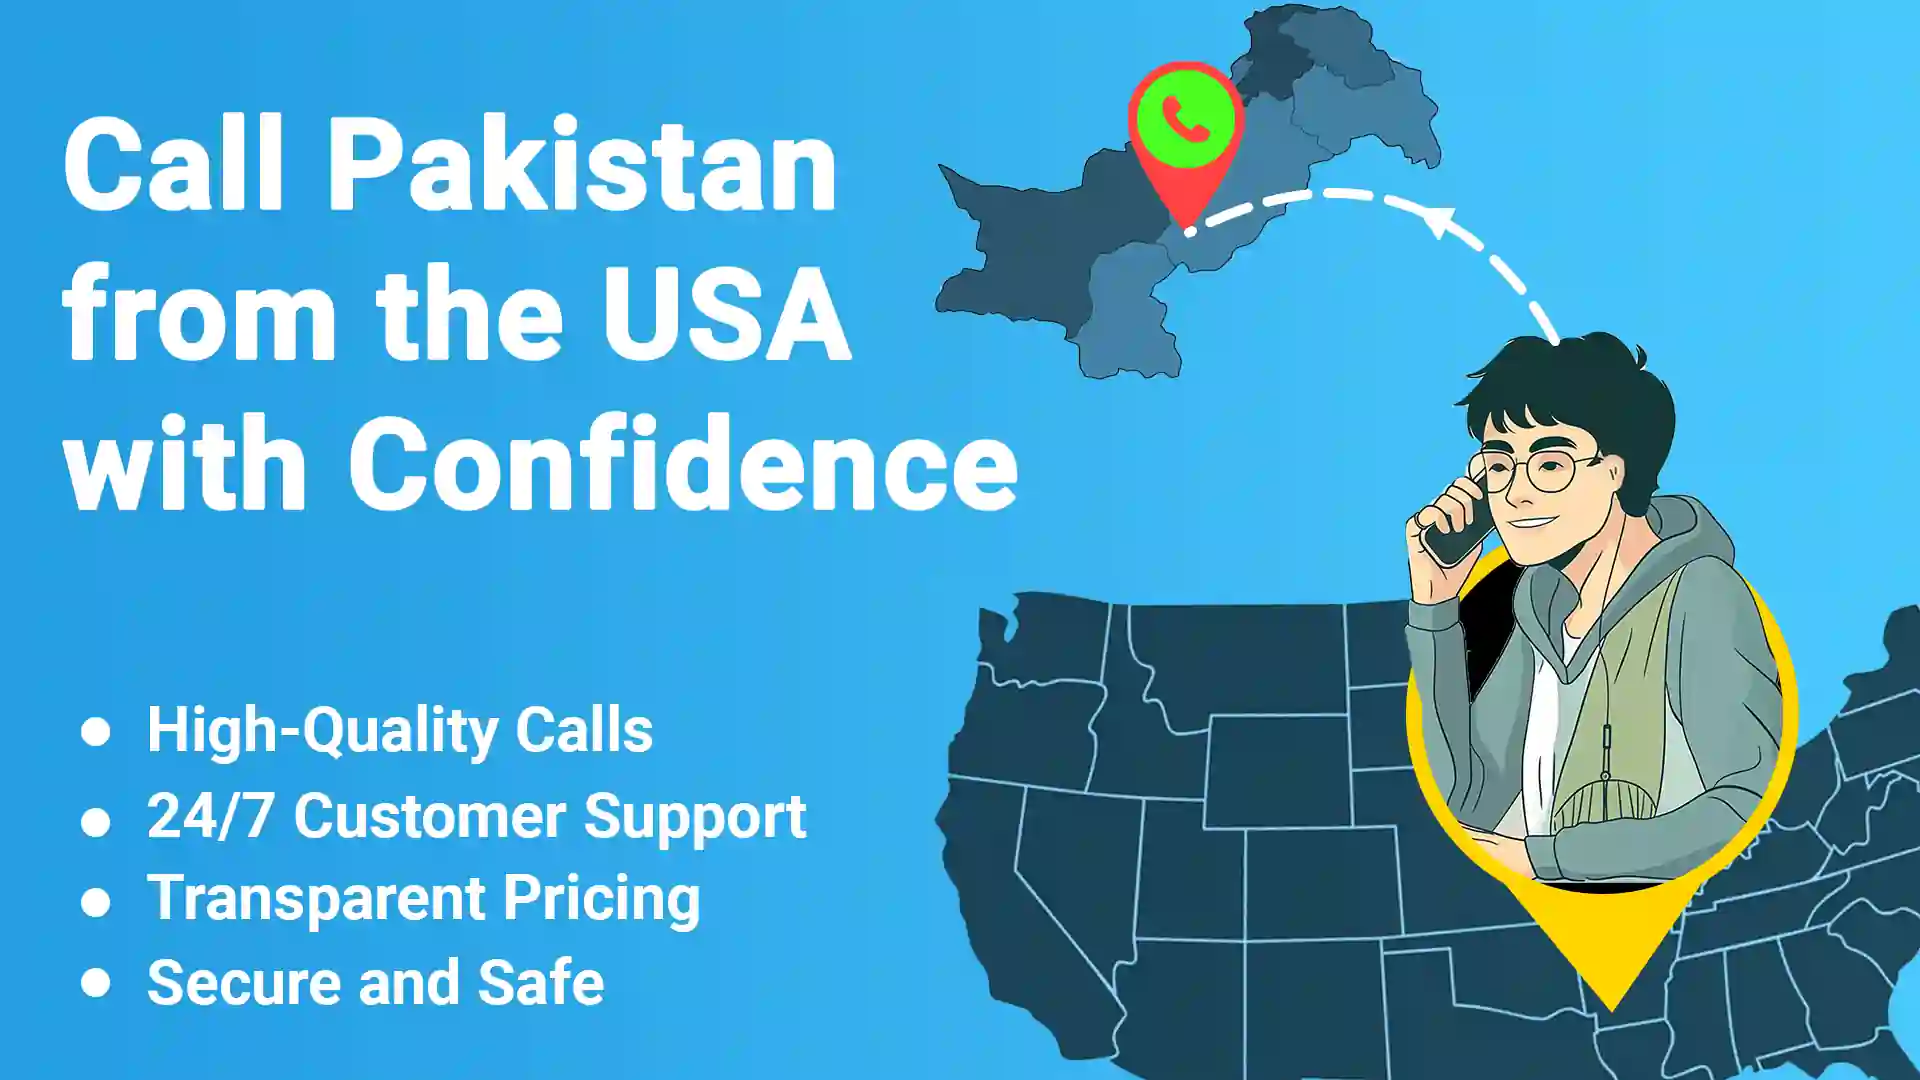 Call Pakistan from the USA with Confidence